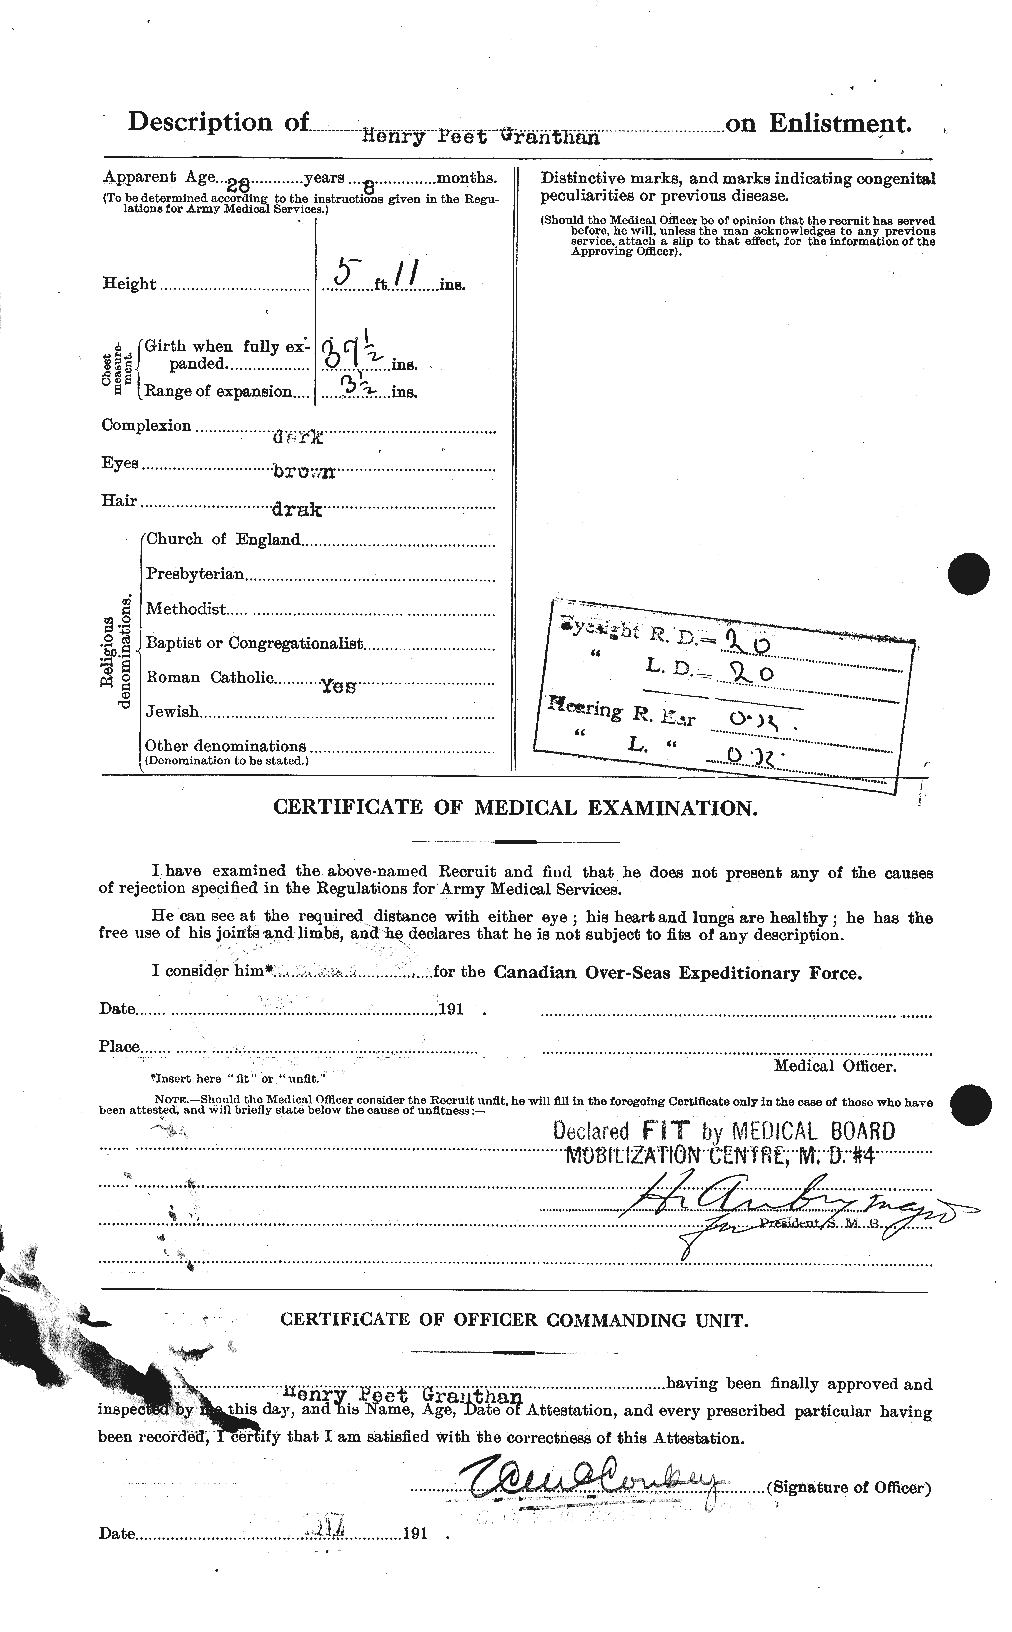 Personnel Records of the First World War - CEF 364411b